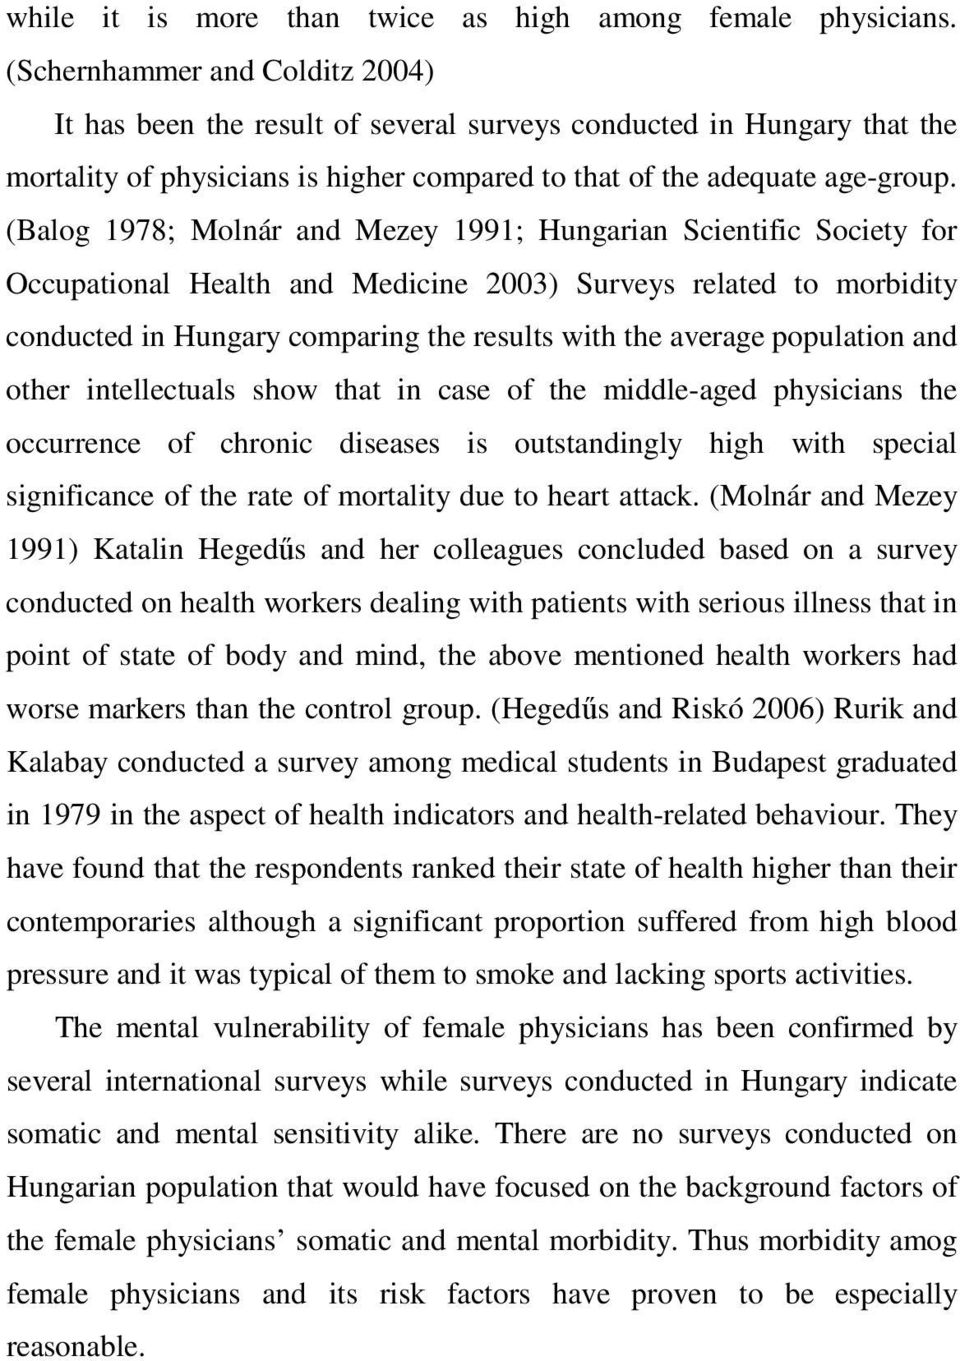 (Balog 1978; Molnár and Mezey 1991; Hungarian Scientific Society for Occupational Health and Medicine 2003) Surveys related to morbidity conducted in Hungary comparing the results with the average